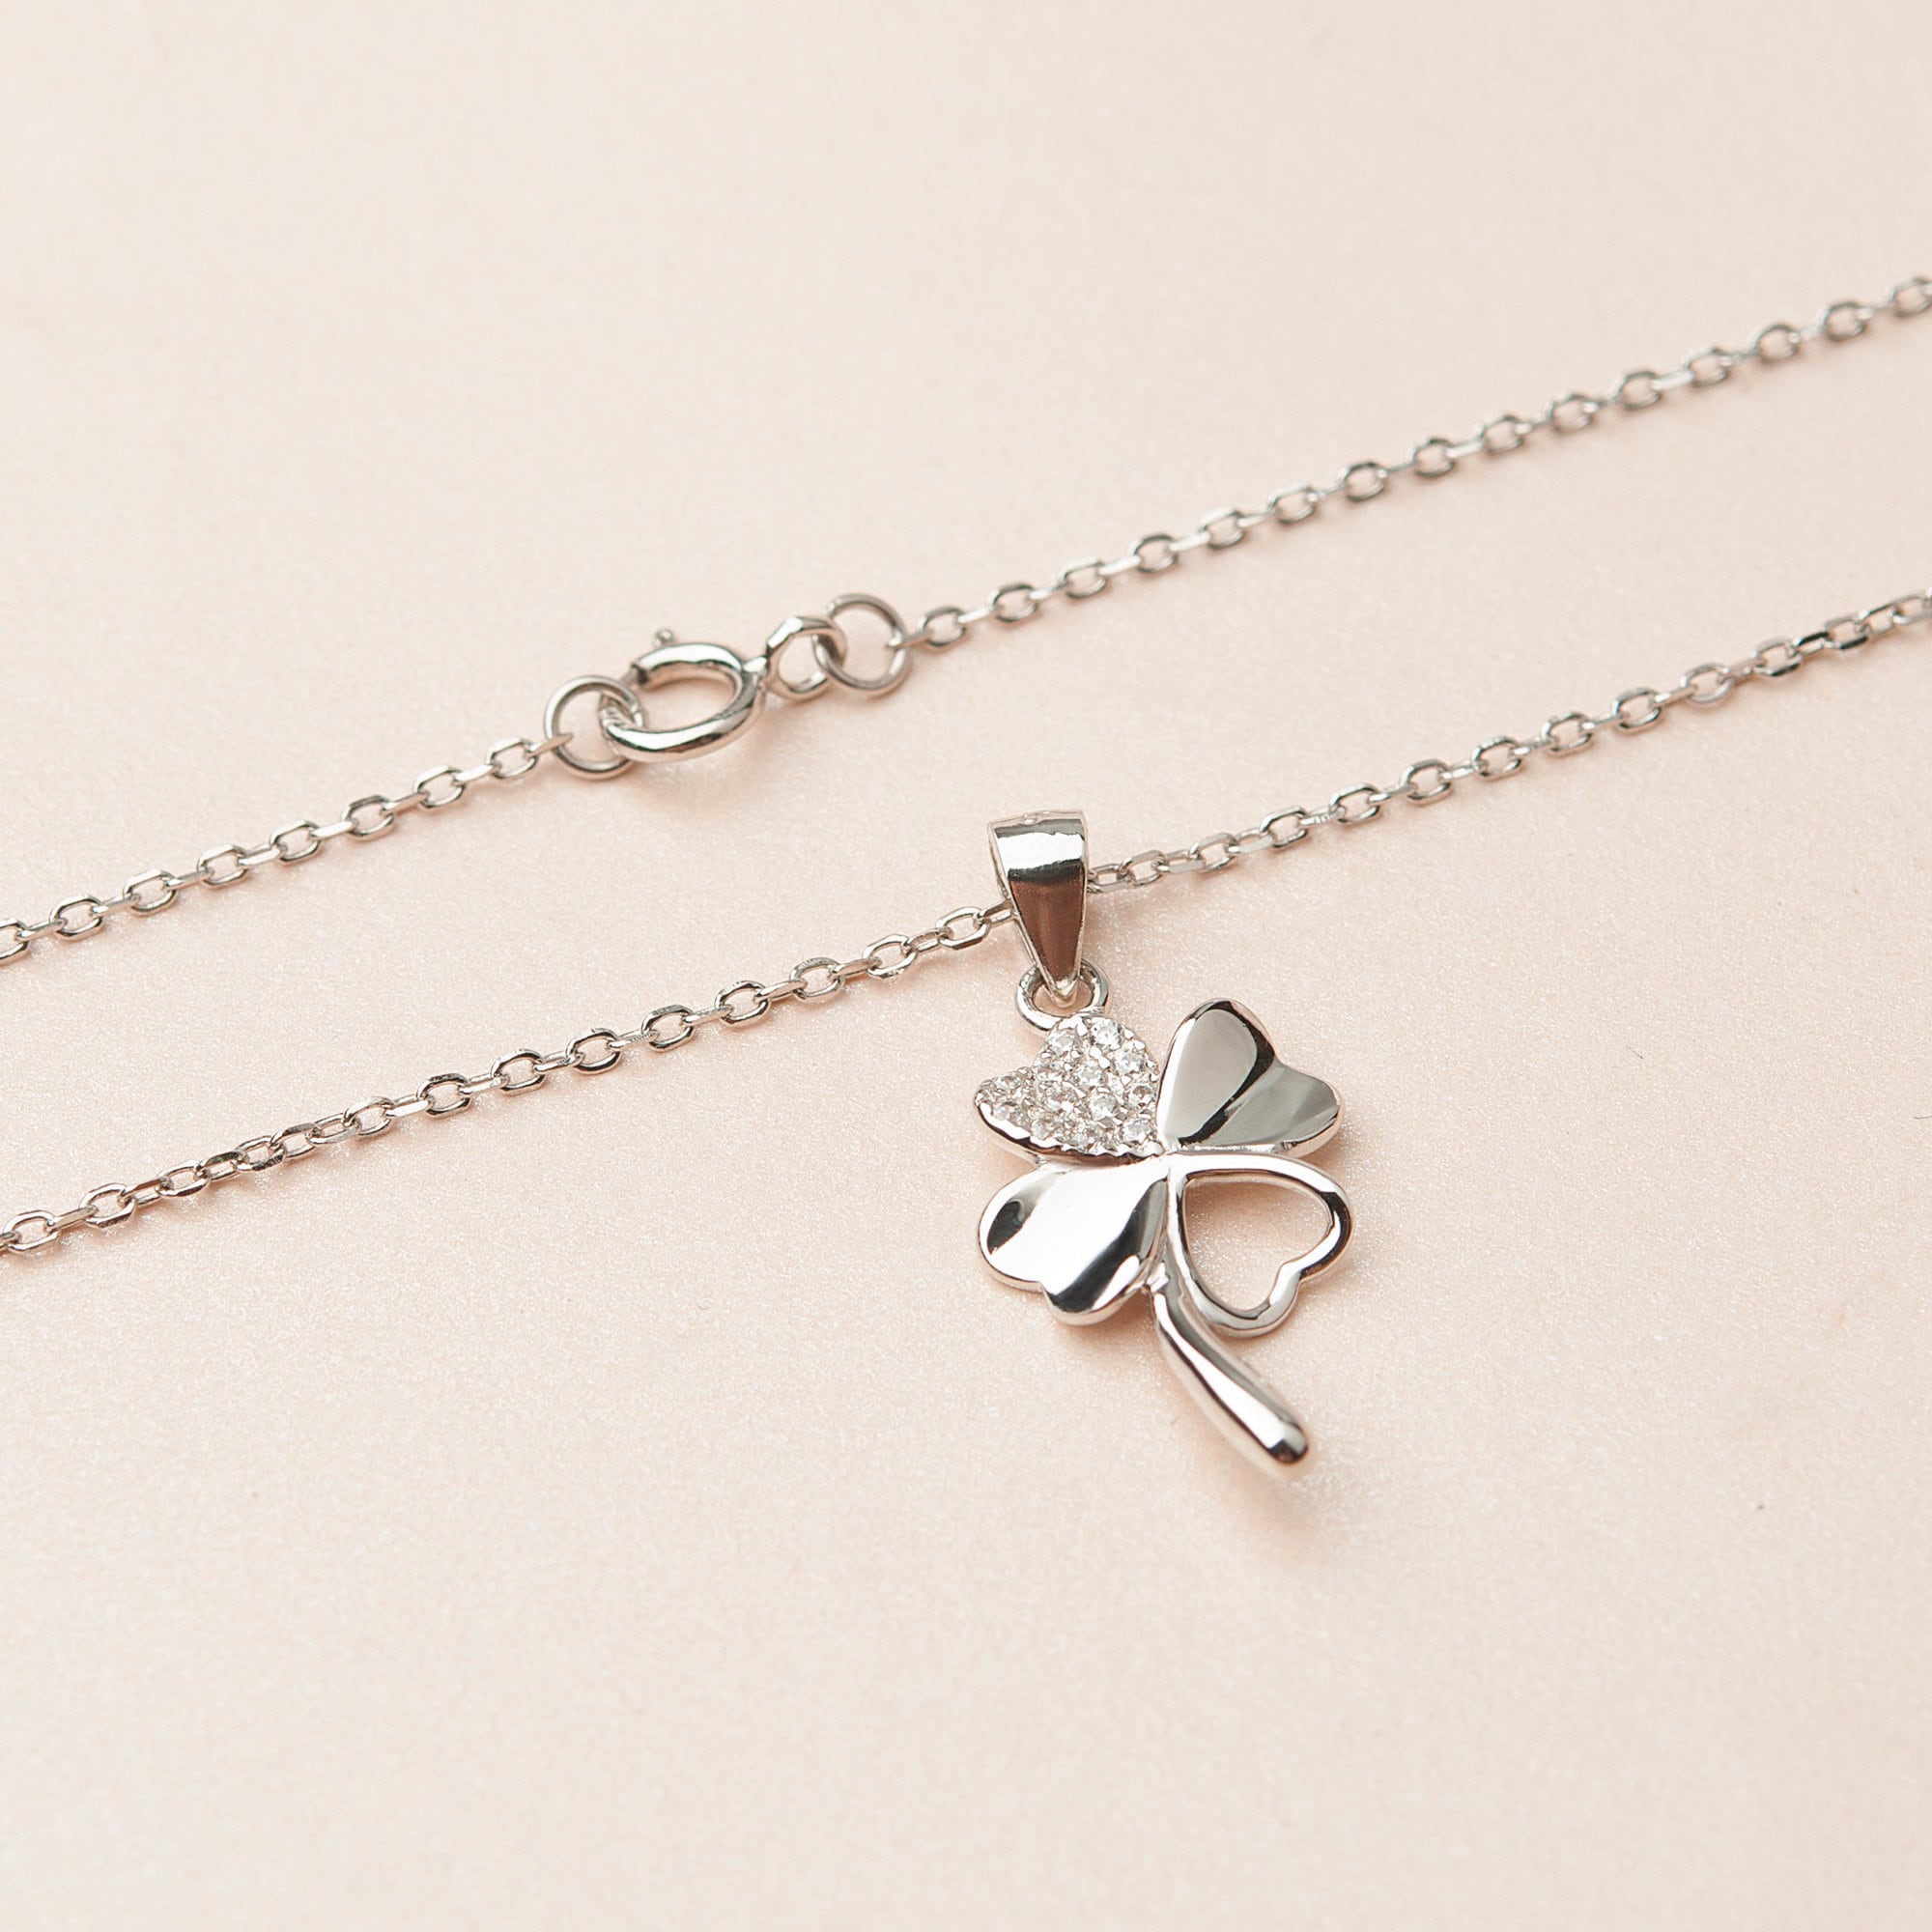 Pearl Clover Necklace, Dainty Best Friend Gift, Birthday Gifts For